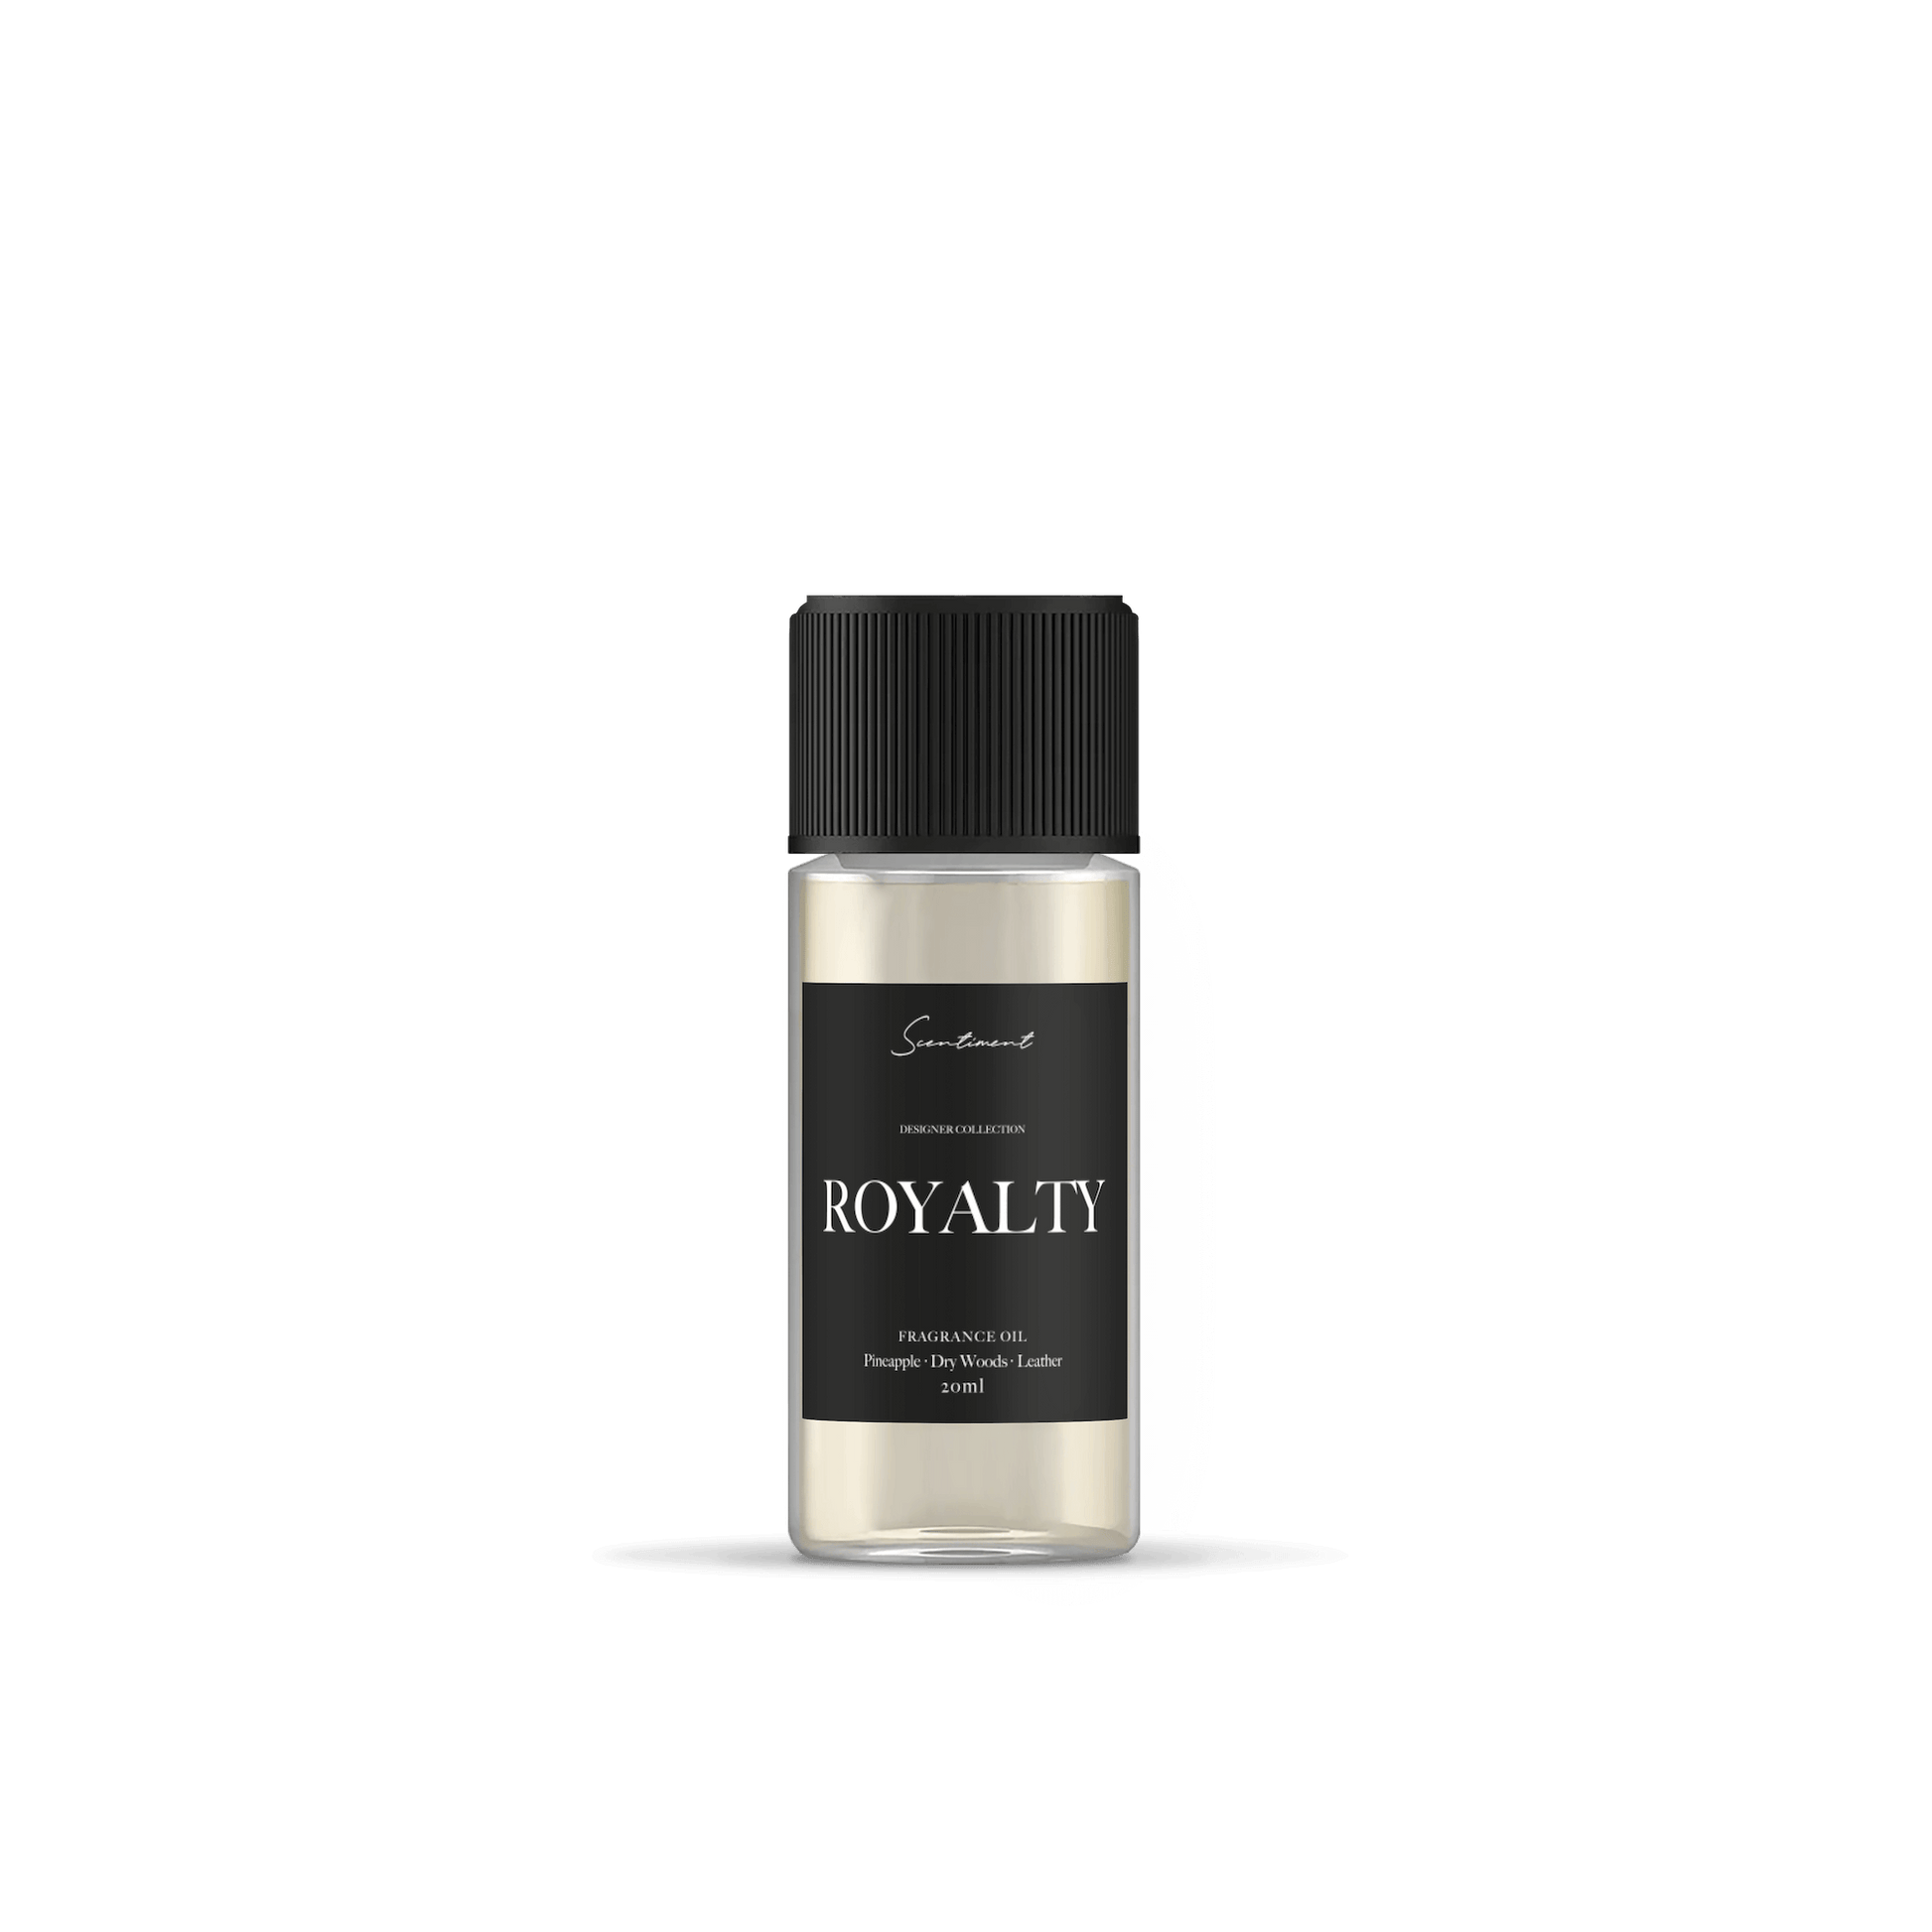 Royalty Fragrance Oil, inspired by Creed Aventus®, with notes of Pineapple, Dry Woods, and Leather.